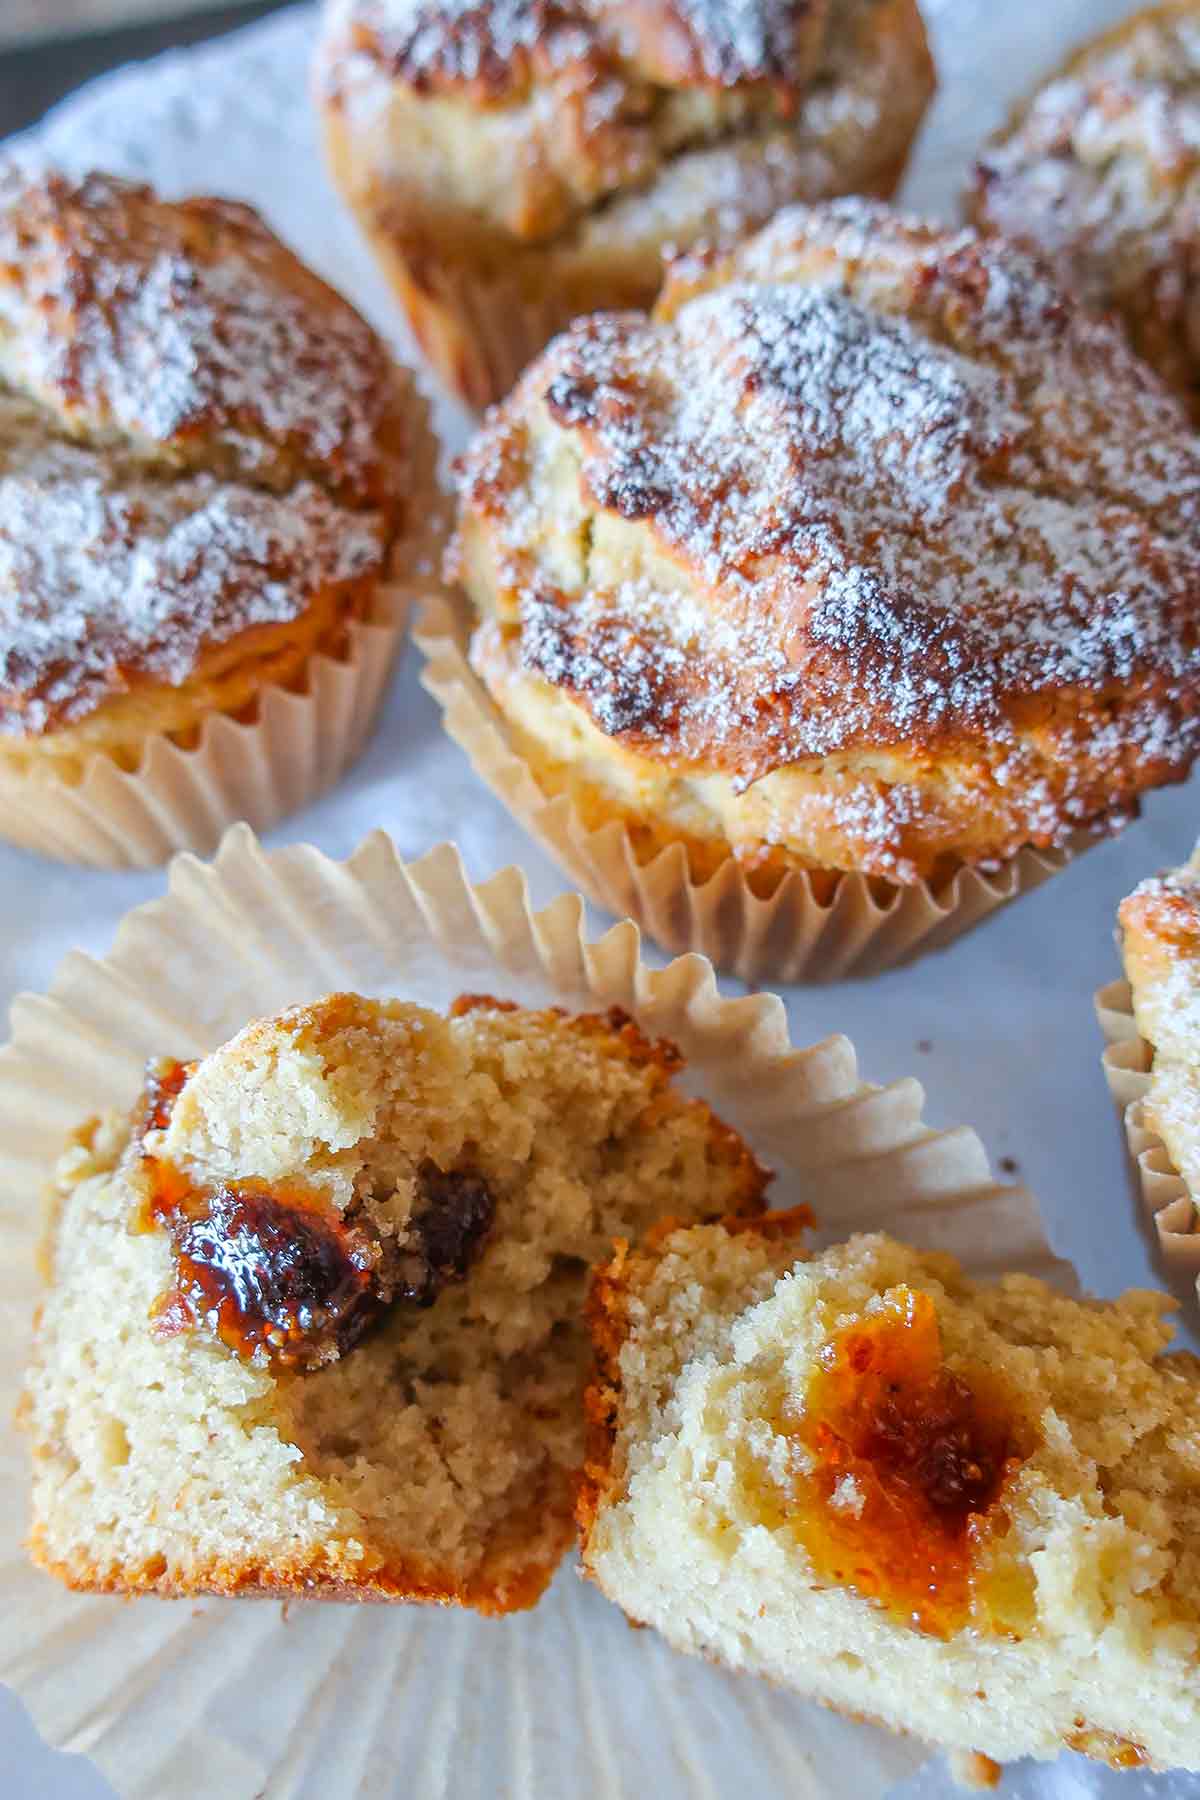 showing the inside of a gluten free fig muffin